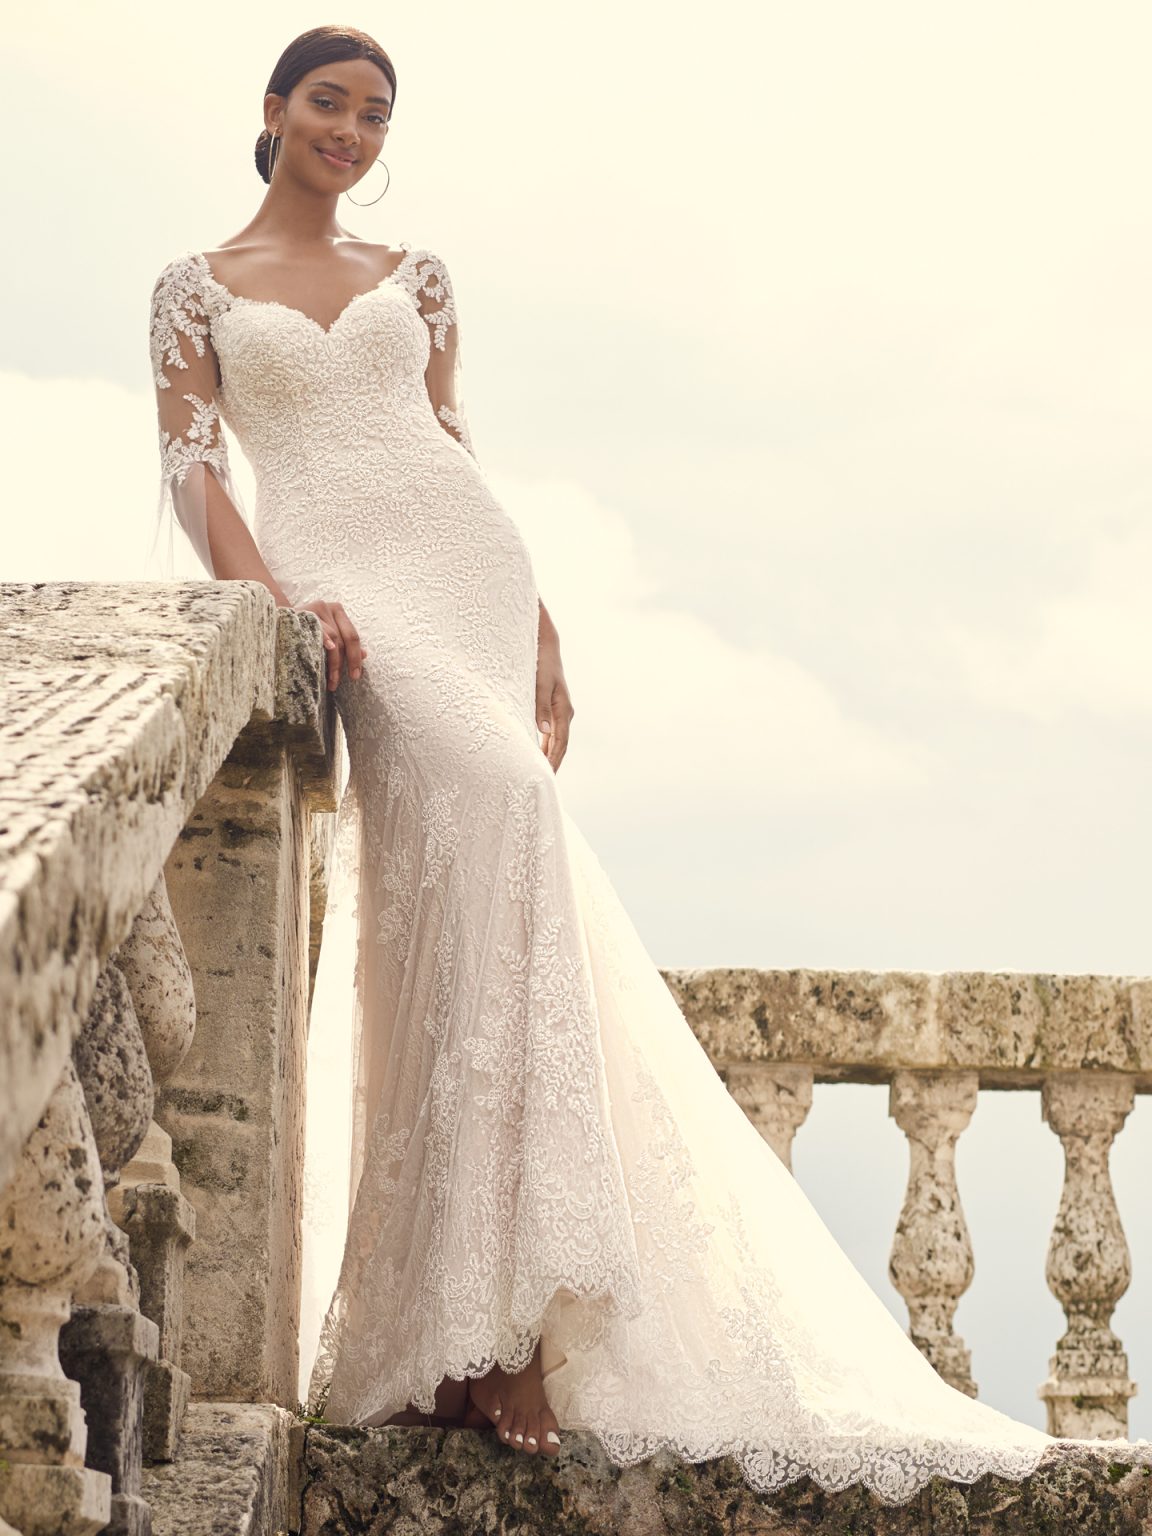 10 Romantic Wedding Dresses for the New Year - Love Maggie